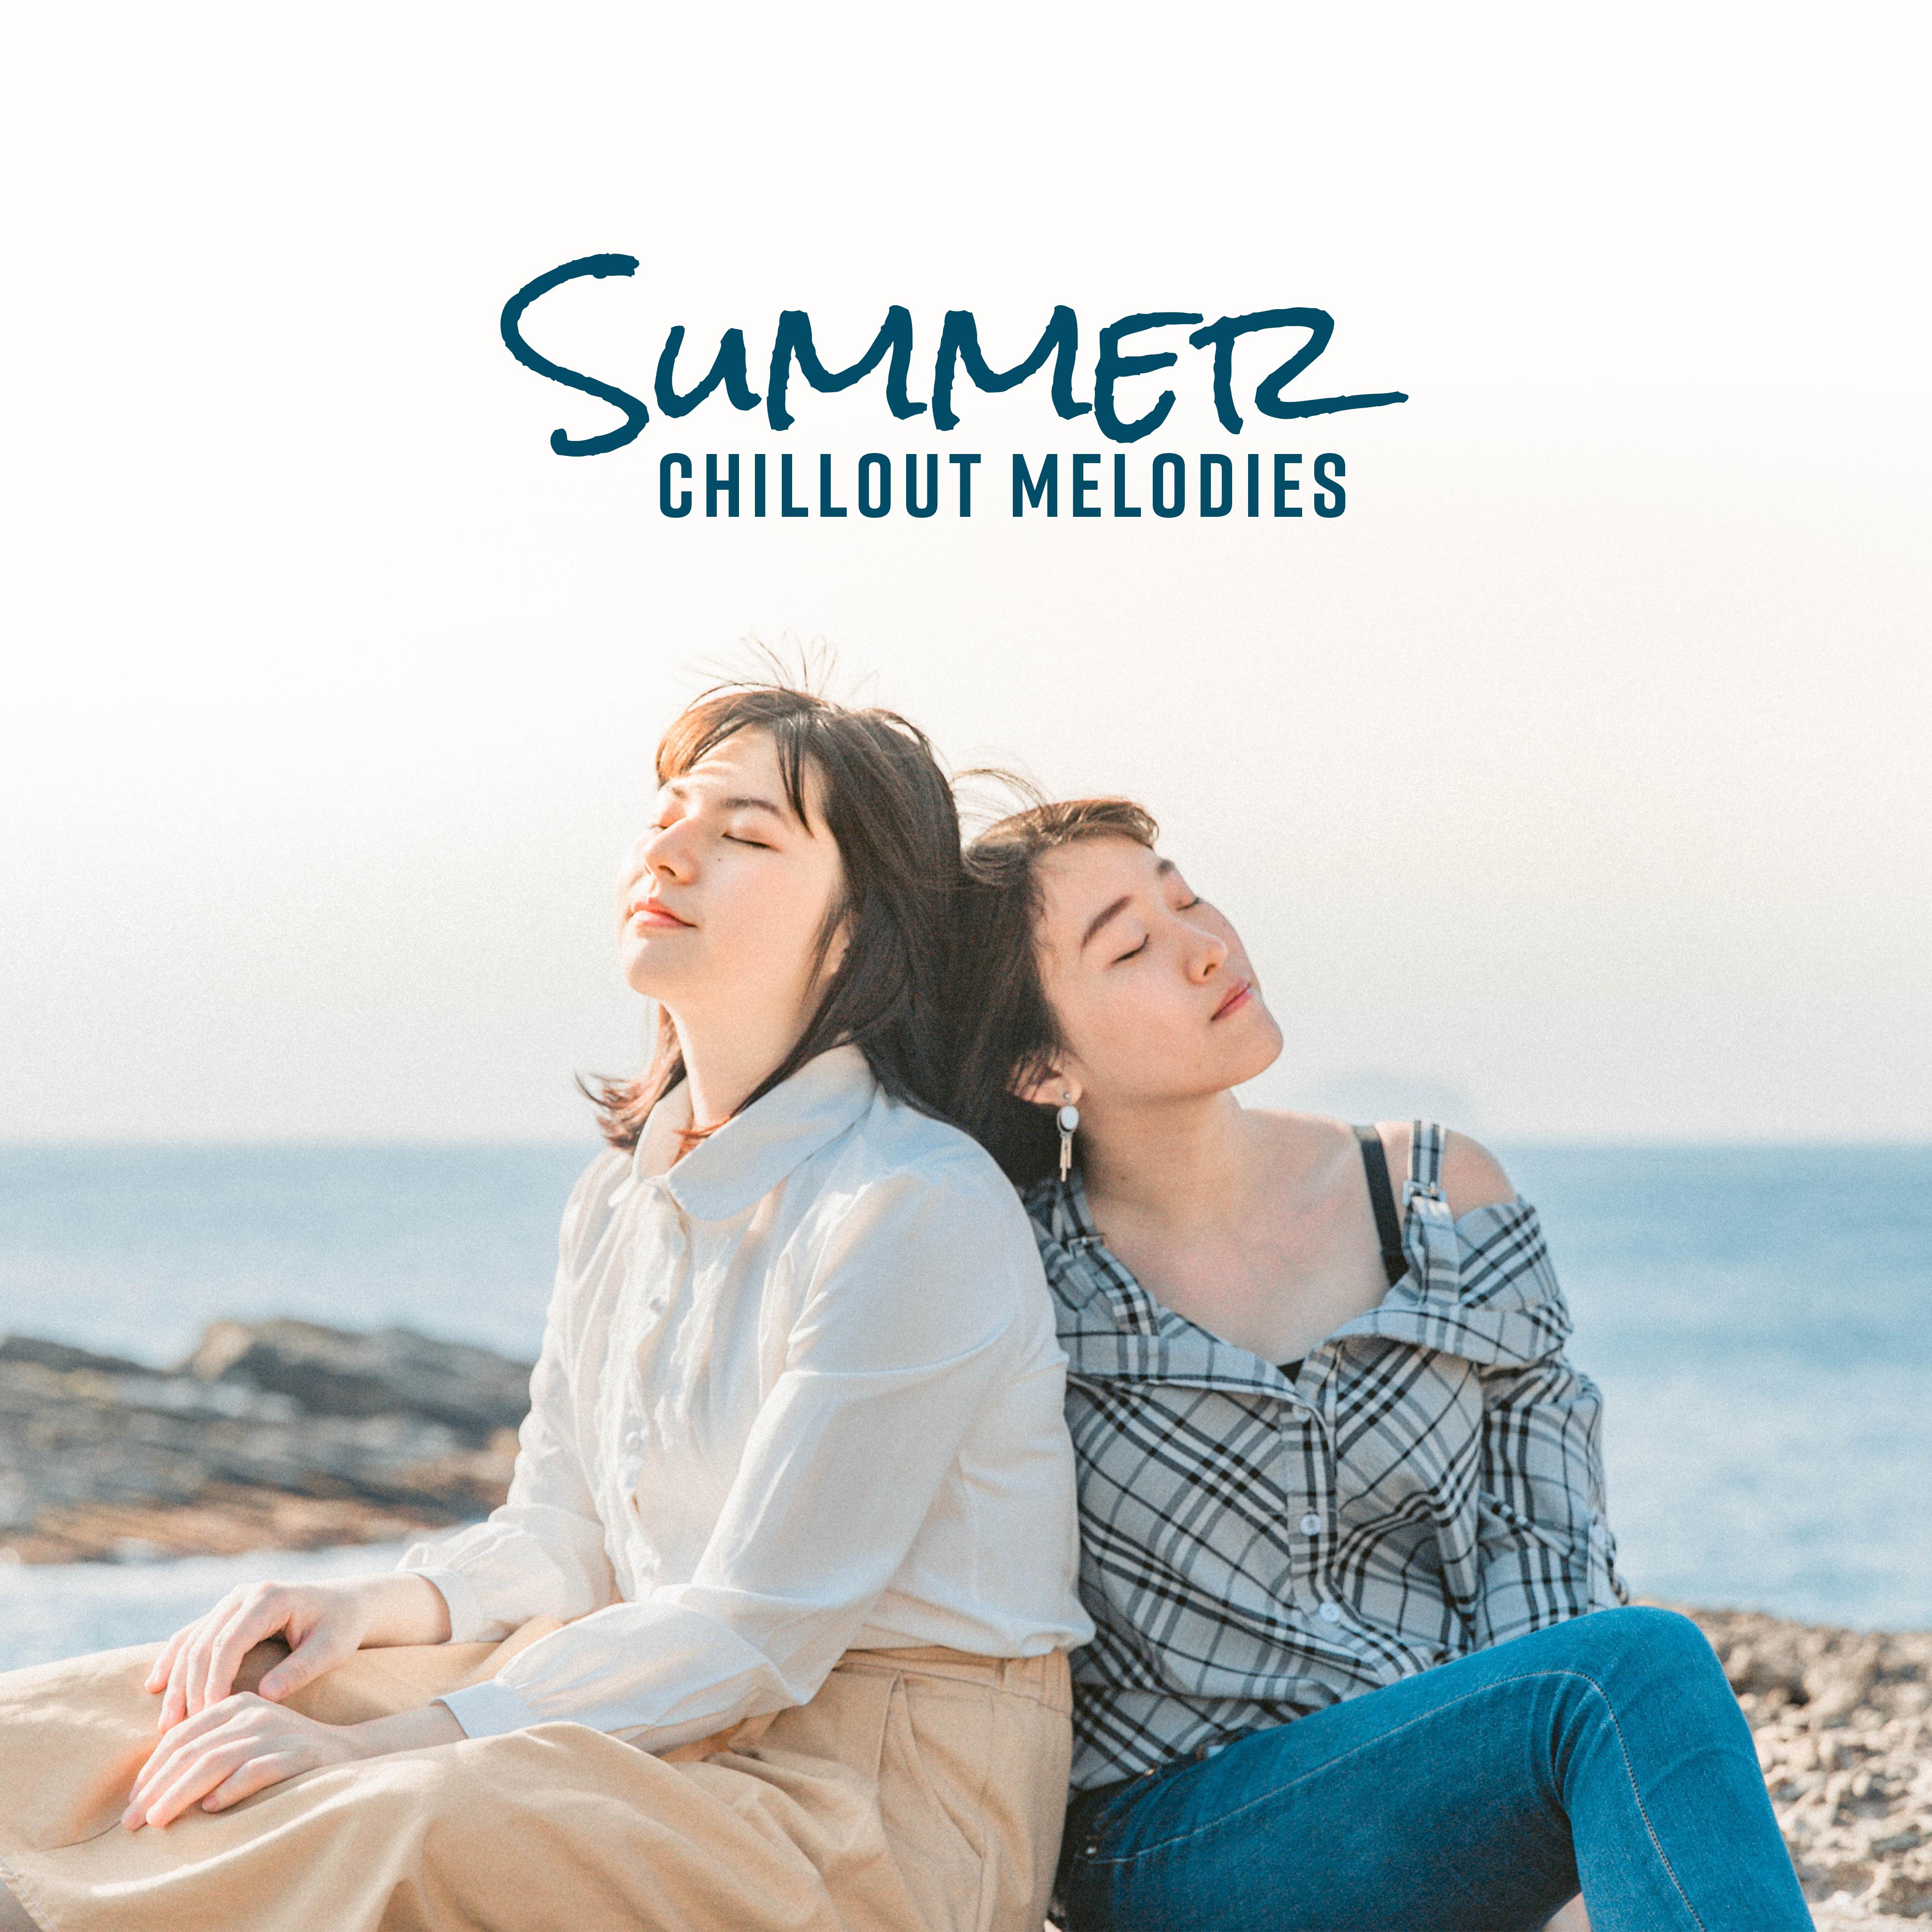 Summer Chillout Melodies